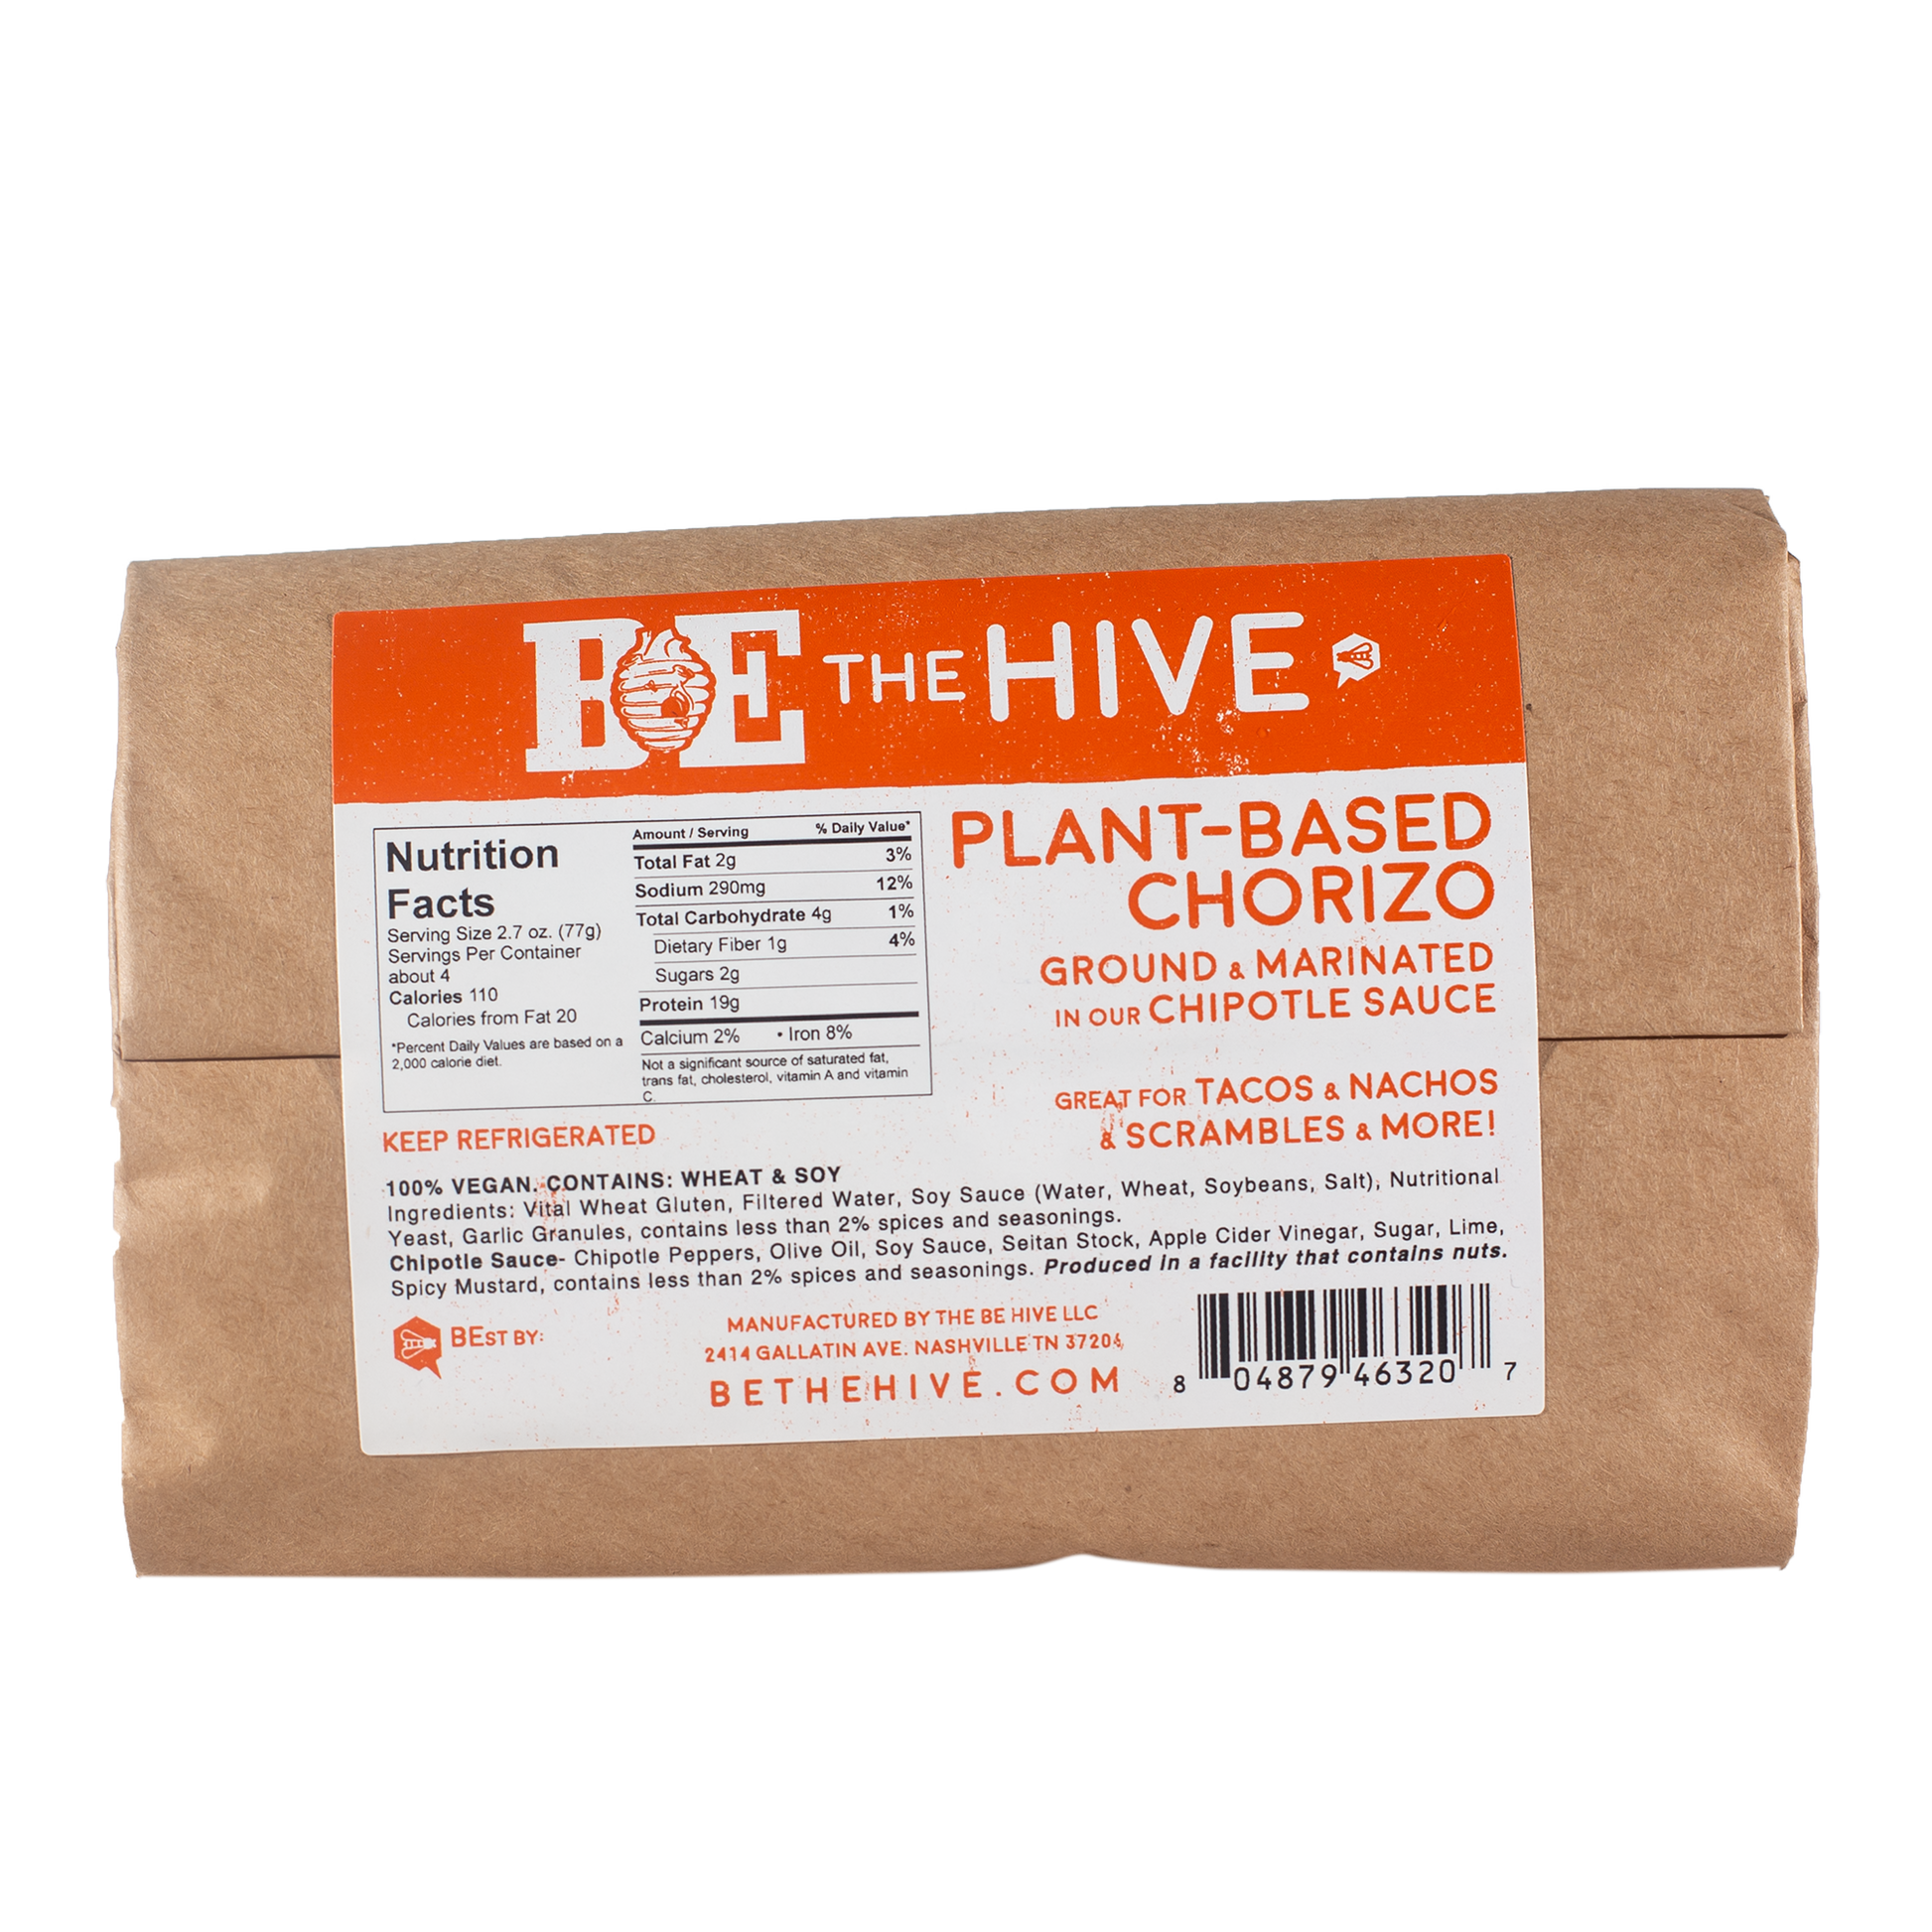 BE-Hive vegan choritzo ingredients and nutrition facts